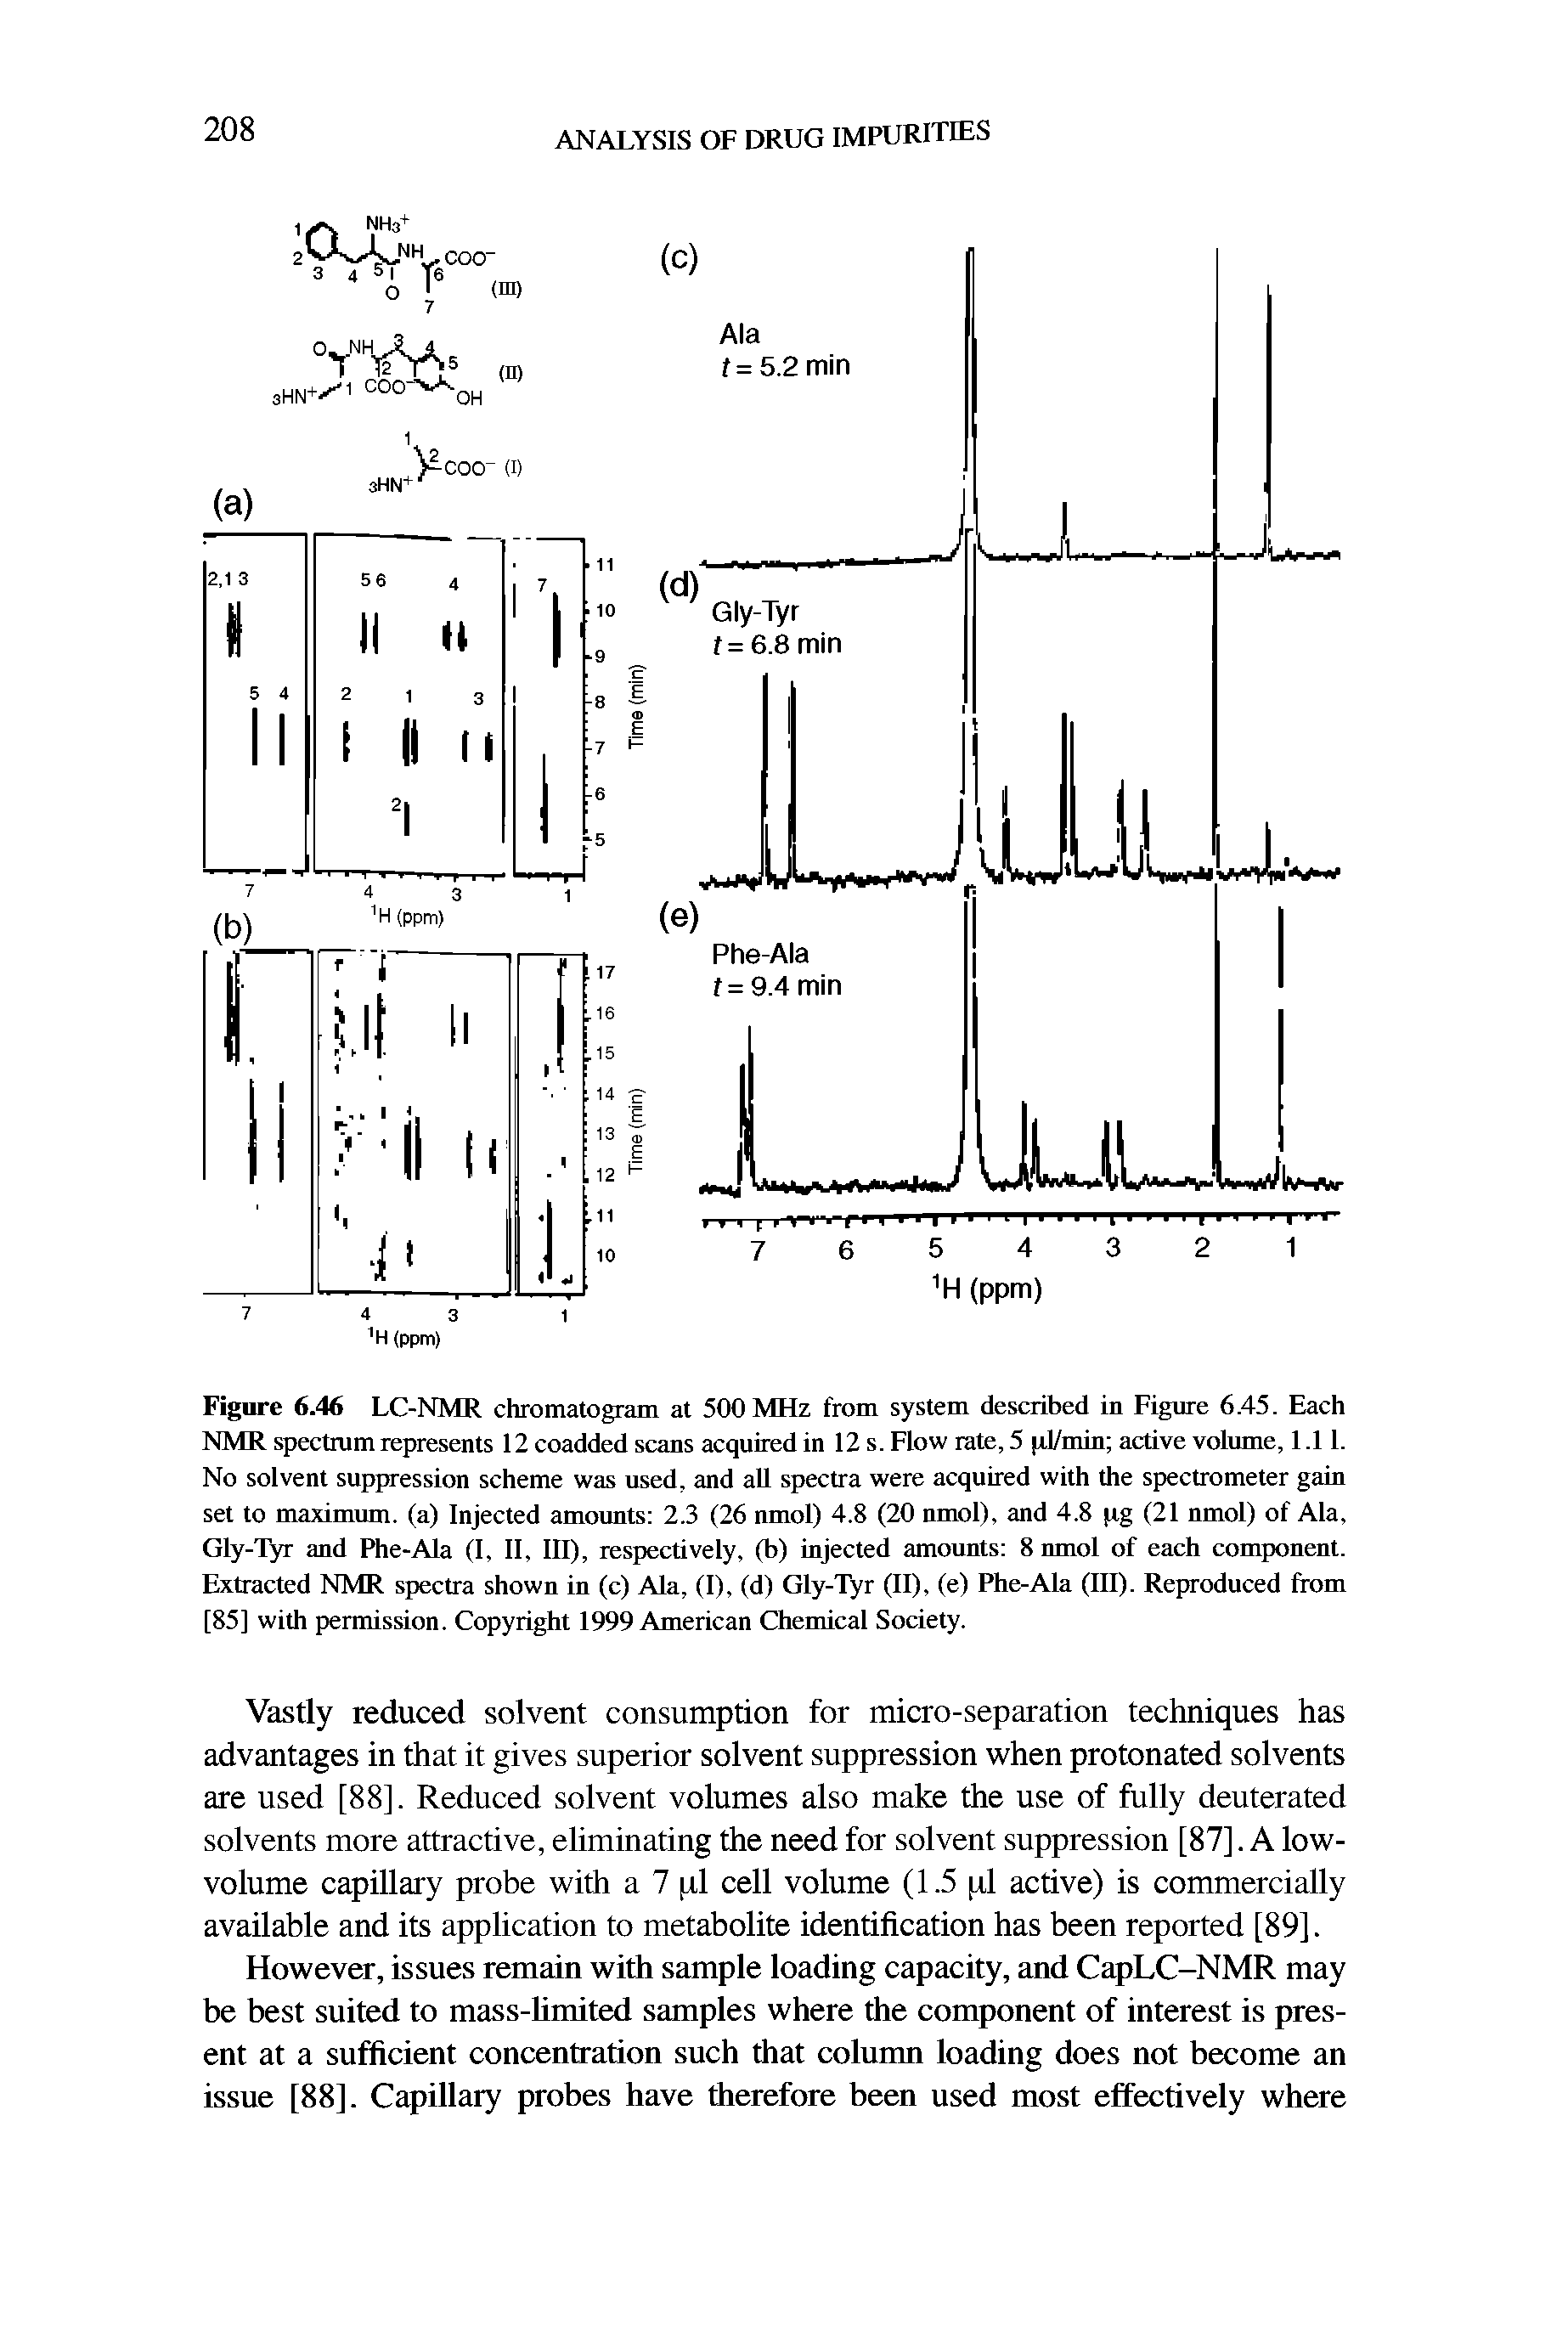 Figure 6.46 LC-NMR chromatogram at 500 MHz from system described in Figure 6.45. Each NMR spectmm represents 12 coadded scans acquired in 12 s. Flow rate, 5 pFmin active volume, 1.11. No solvent suppression scheme was used, and all spectra were acquired with the spectrometer gain set to maximum, (a) Injected amounts 2.3 (26 nmol) 4.8 (20 nmol), and 4.8 pg (21 nmol) of Ala, Gly-Tyr and Phe-Ala (I, II, III), respectively, (b) injected amounts 8 nmol of each component. Extracted NMR spectra shown in (c) Ala, (I), (d) Gly-Tyr (II), (e) Phe-Ala (III). Reproduced from [85] with permission. Copyright 1999 American Chemical Society.